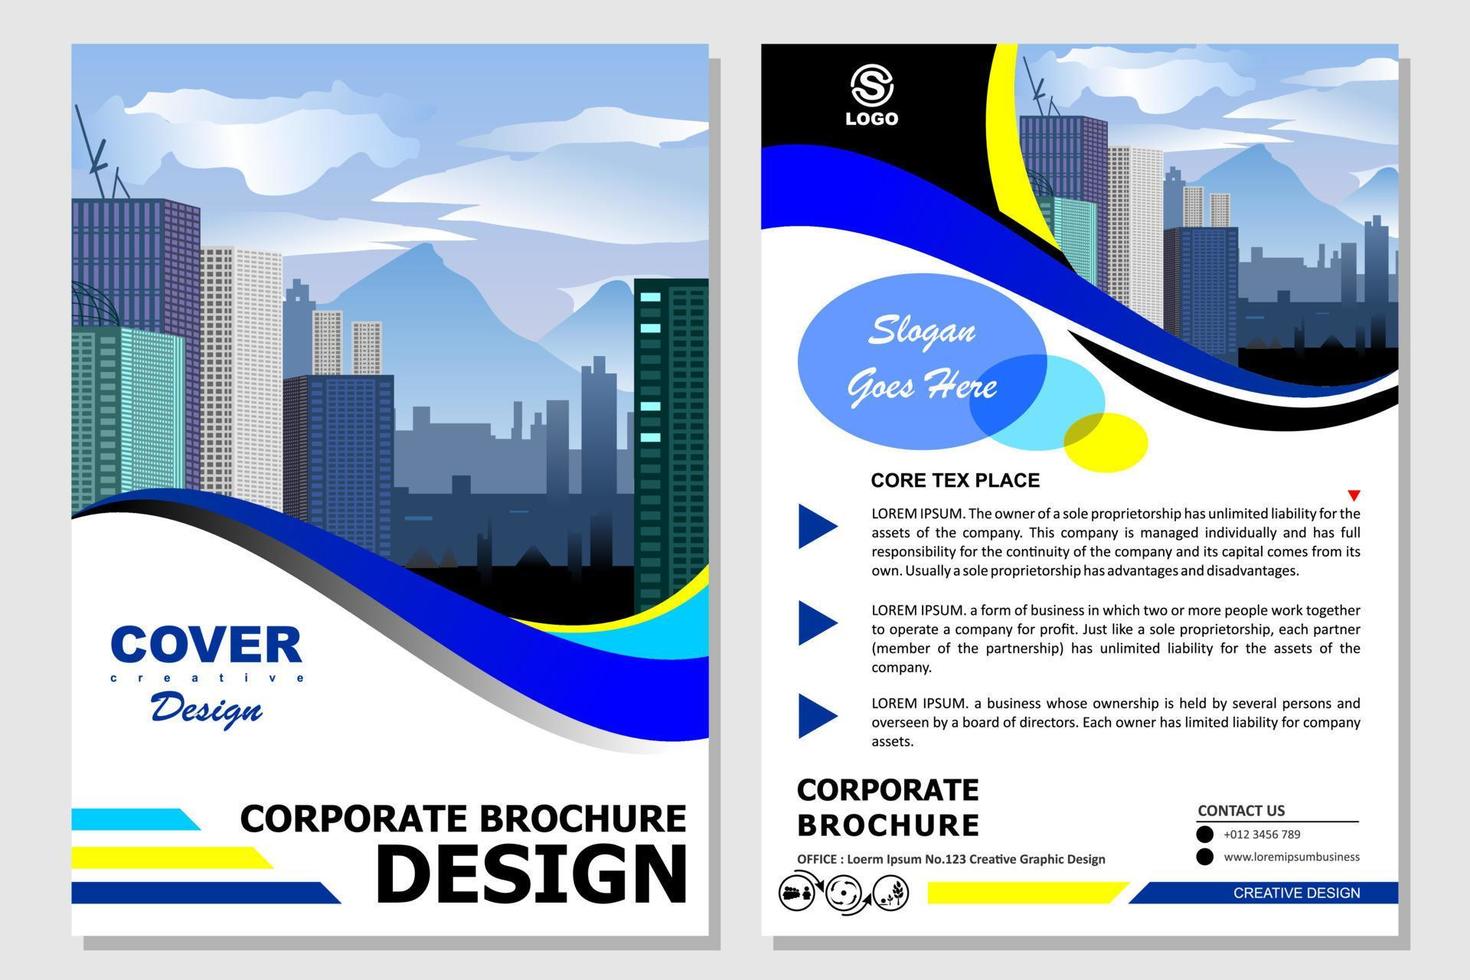 brochure templates, flyers, brochures, posters, cover designs, layout spaces for photo backgrounds, vector illustration templates in A4 size. blue yellow color brochure with wave pattern